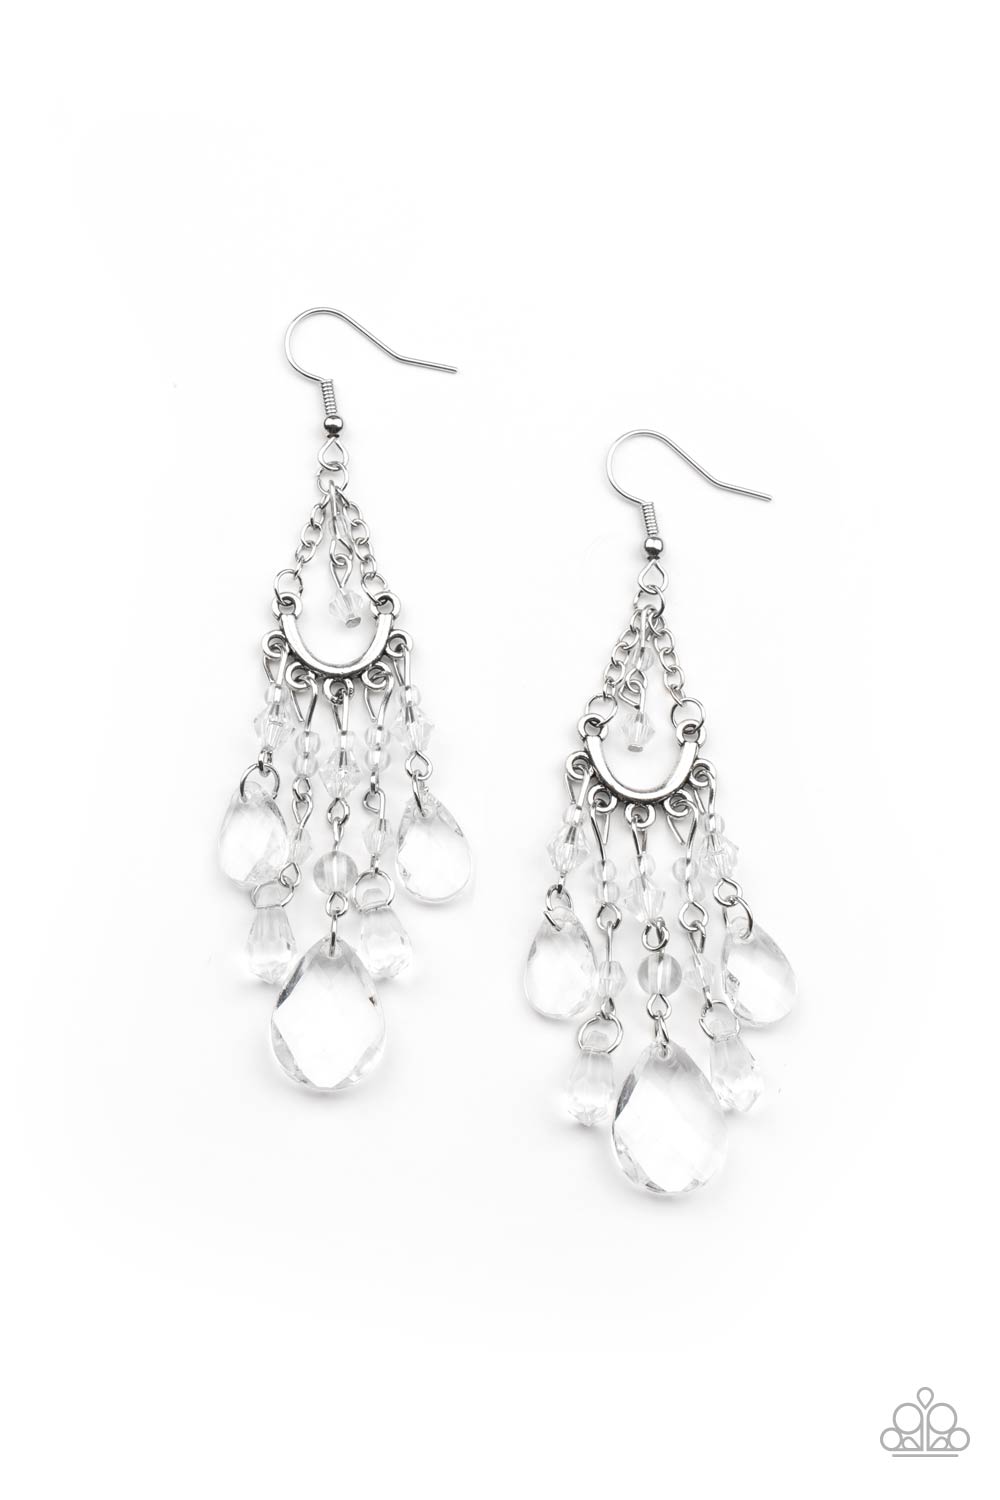 Paid Vacation - White Earrings - Princess Glam Shop